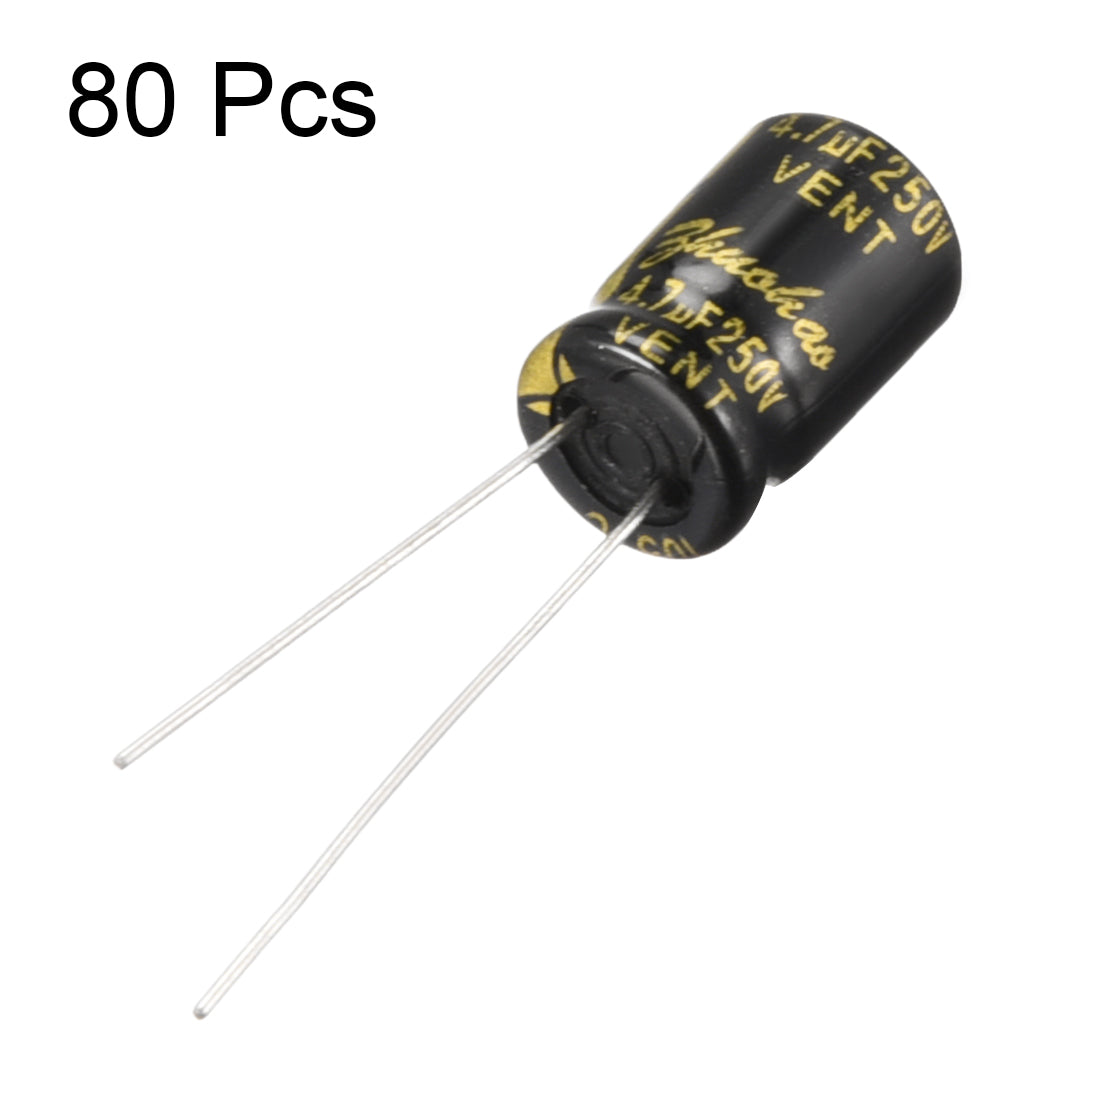 uxcell Uxcell Aluminum Radial Electrolytic Capacitor with 4.7uF 250V 105 Celsius Life 2000H 8 x 12 mm Black 80pcs